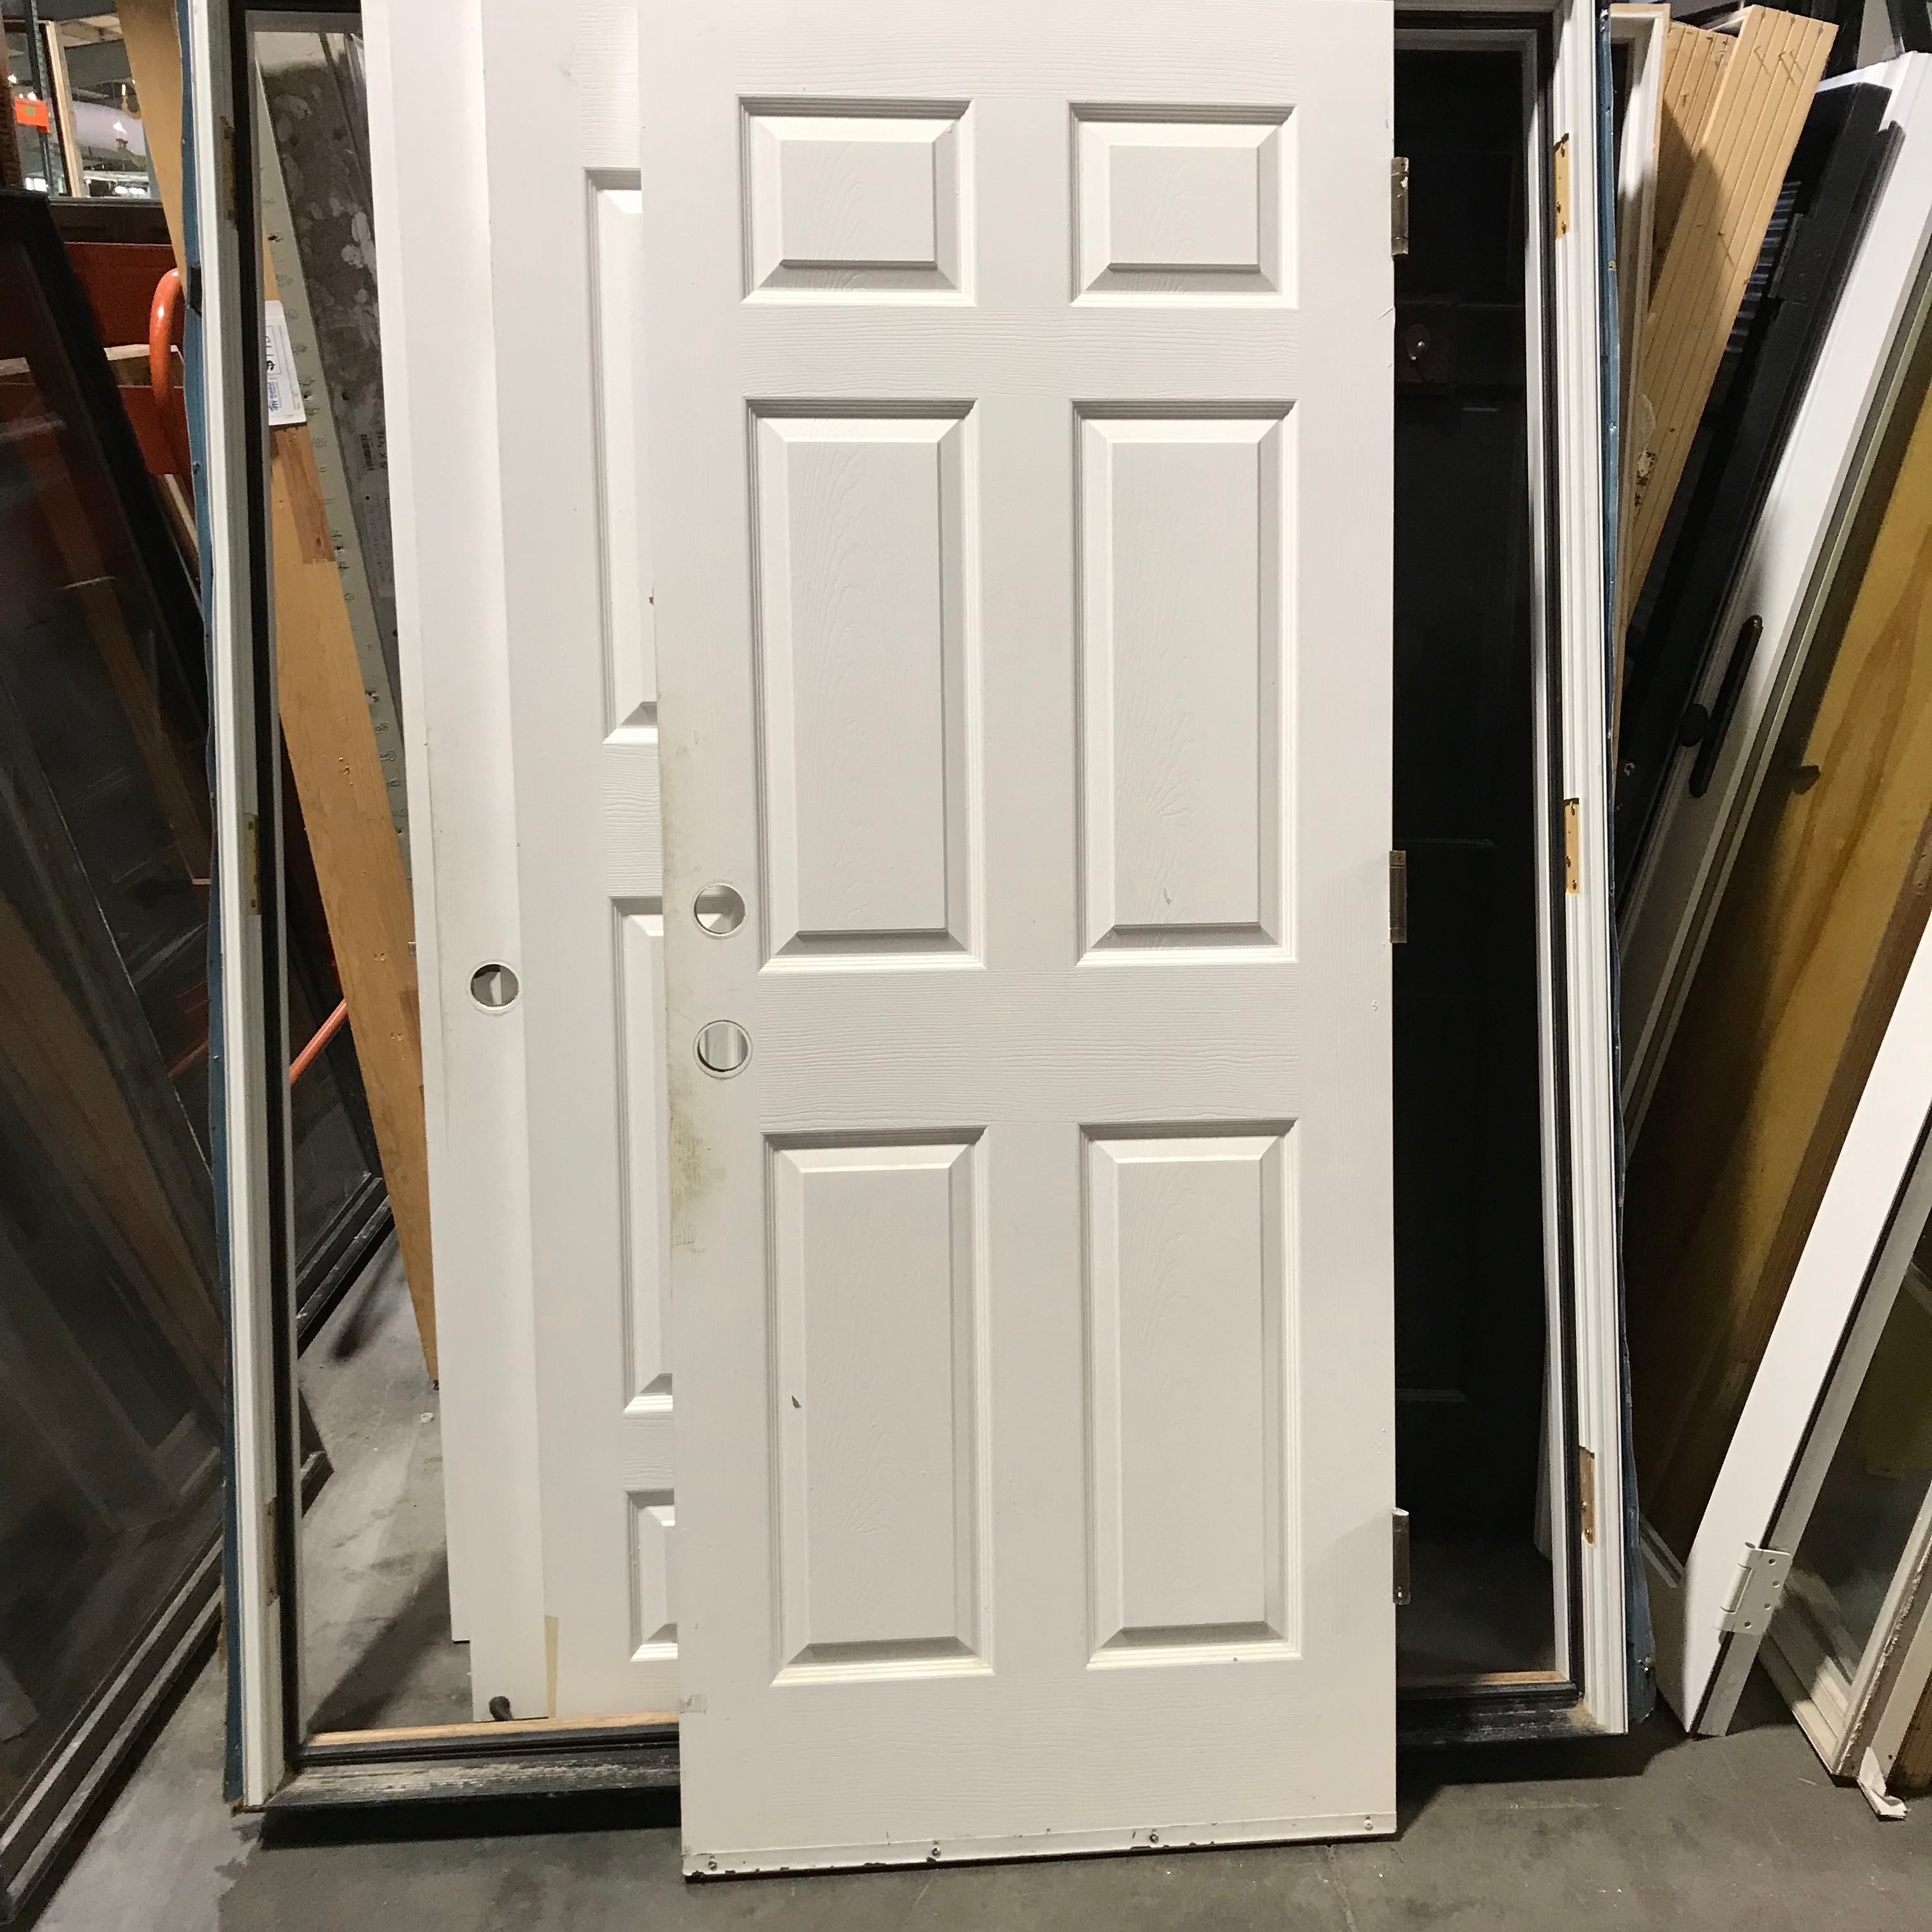 31.75"x 80"x 1.5" 6 Panel Painted White Solid 20 Minute Rated Fire Door